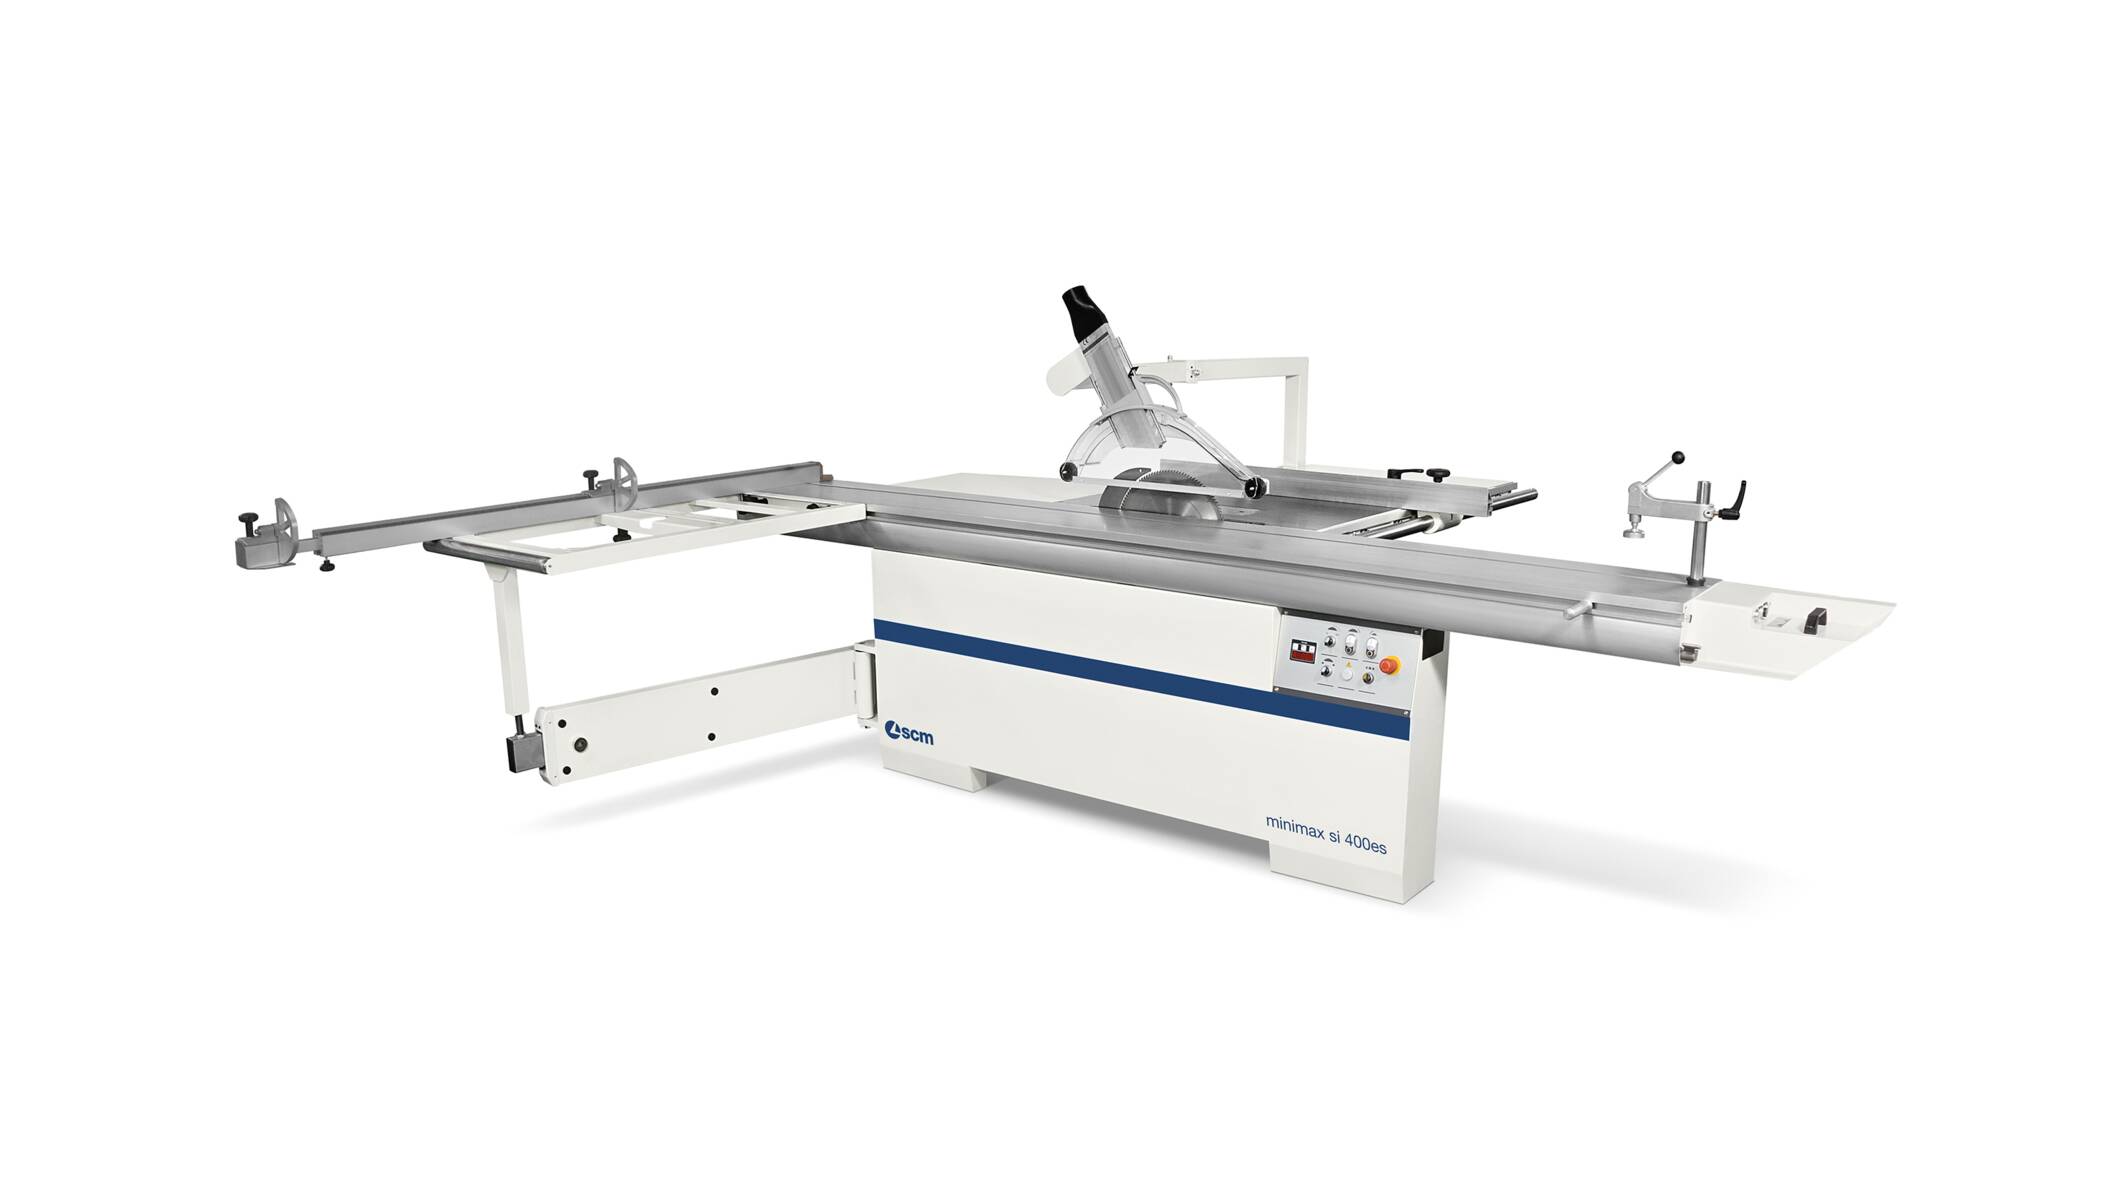 Joinery machines - Sliding table saws - minimax si 400es